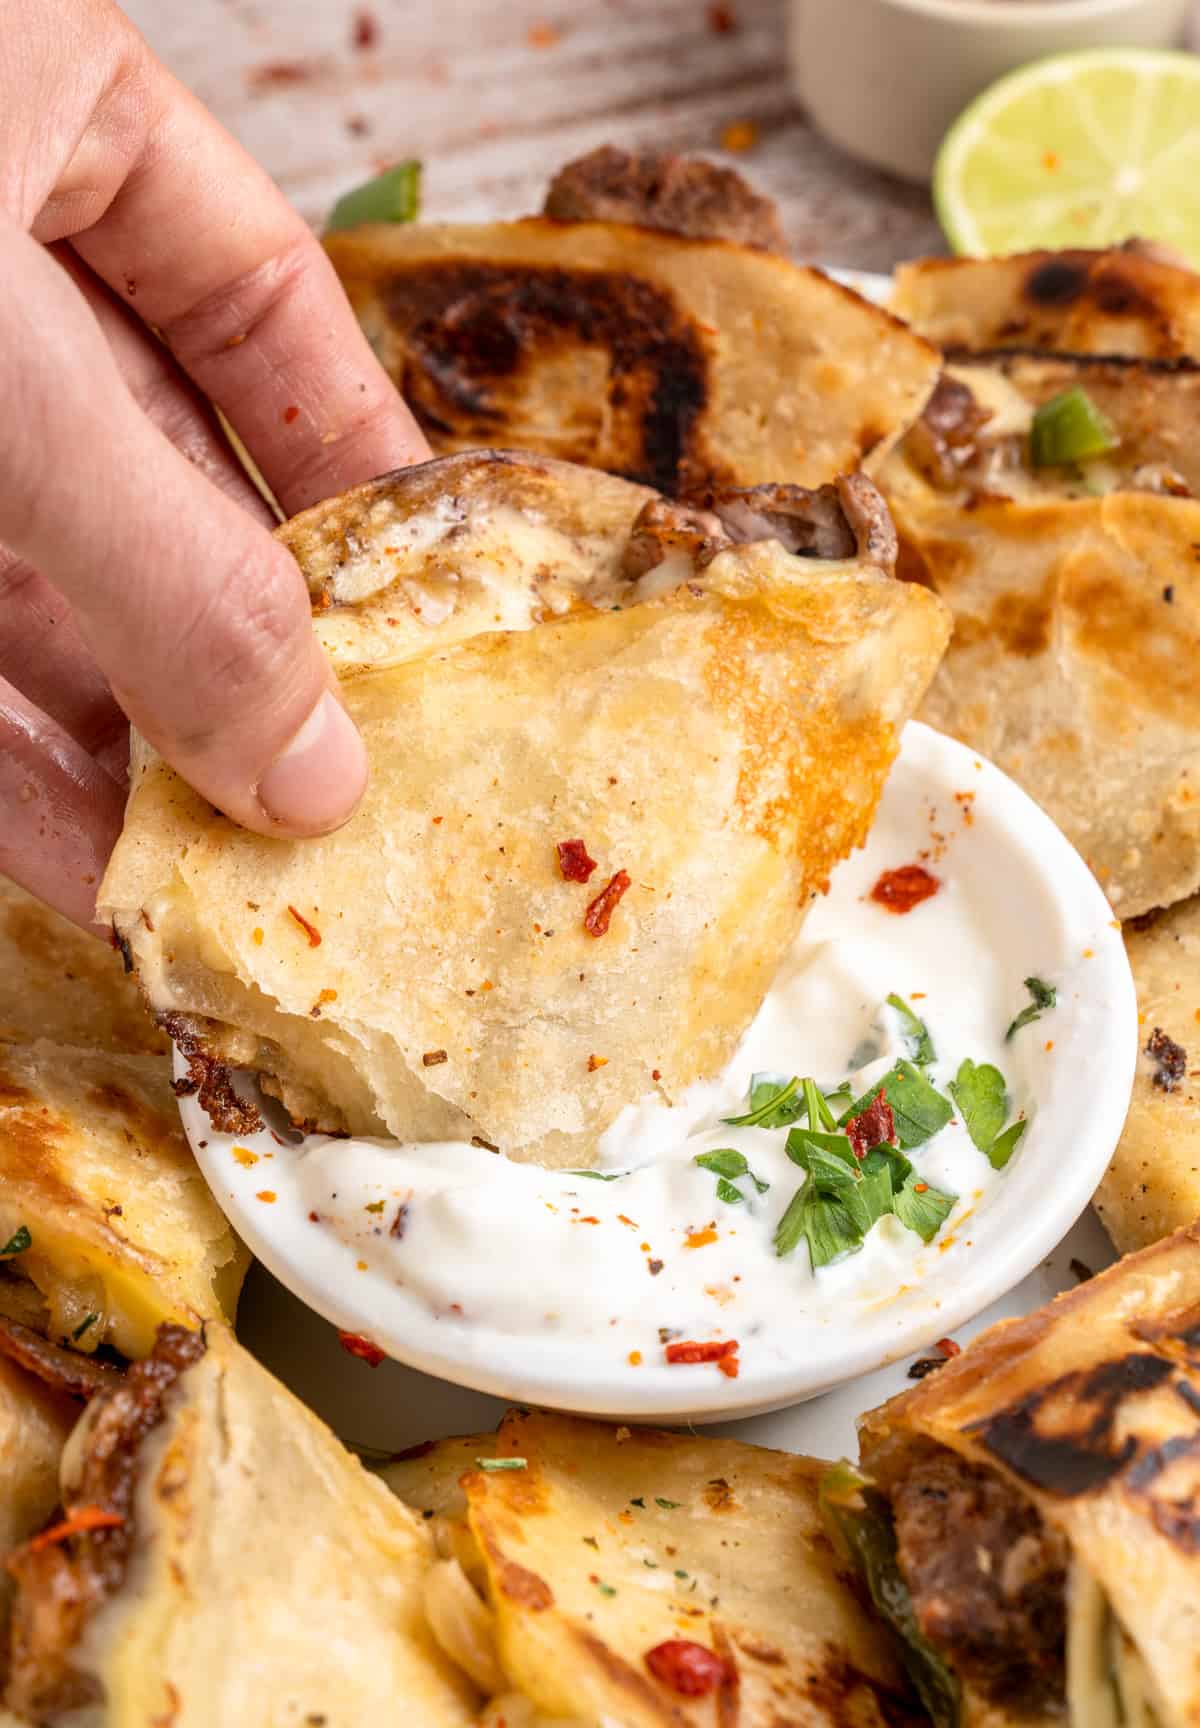 Hand dipping one of the quesadilla triangles into the sour cream.